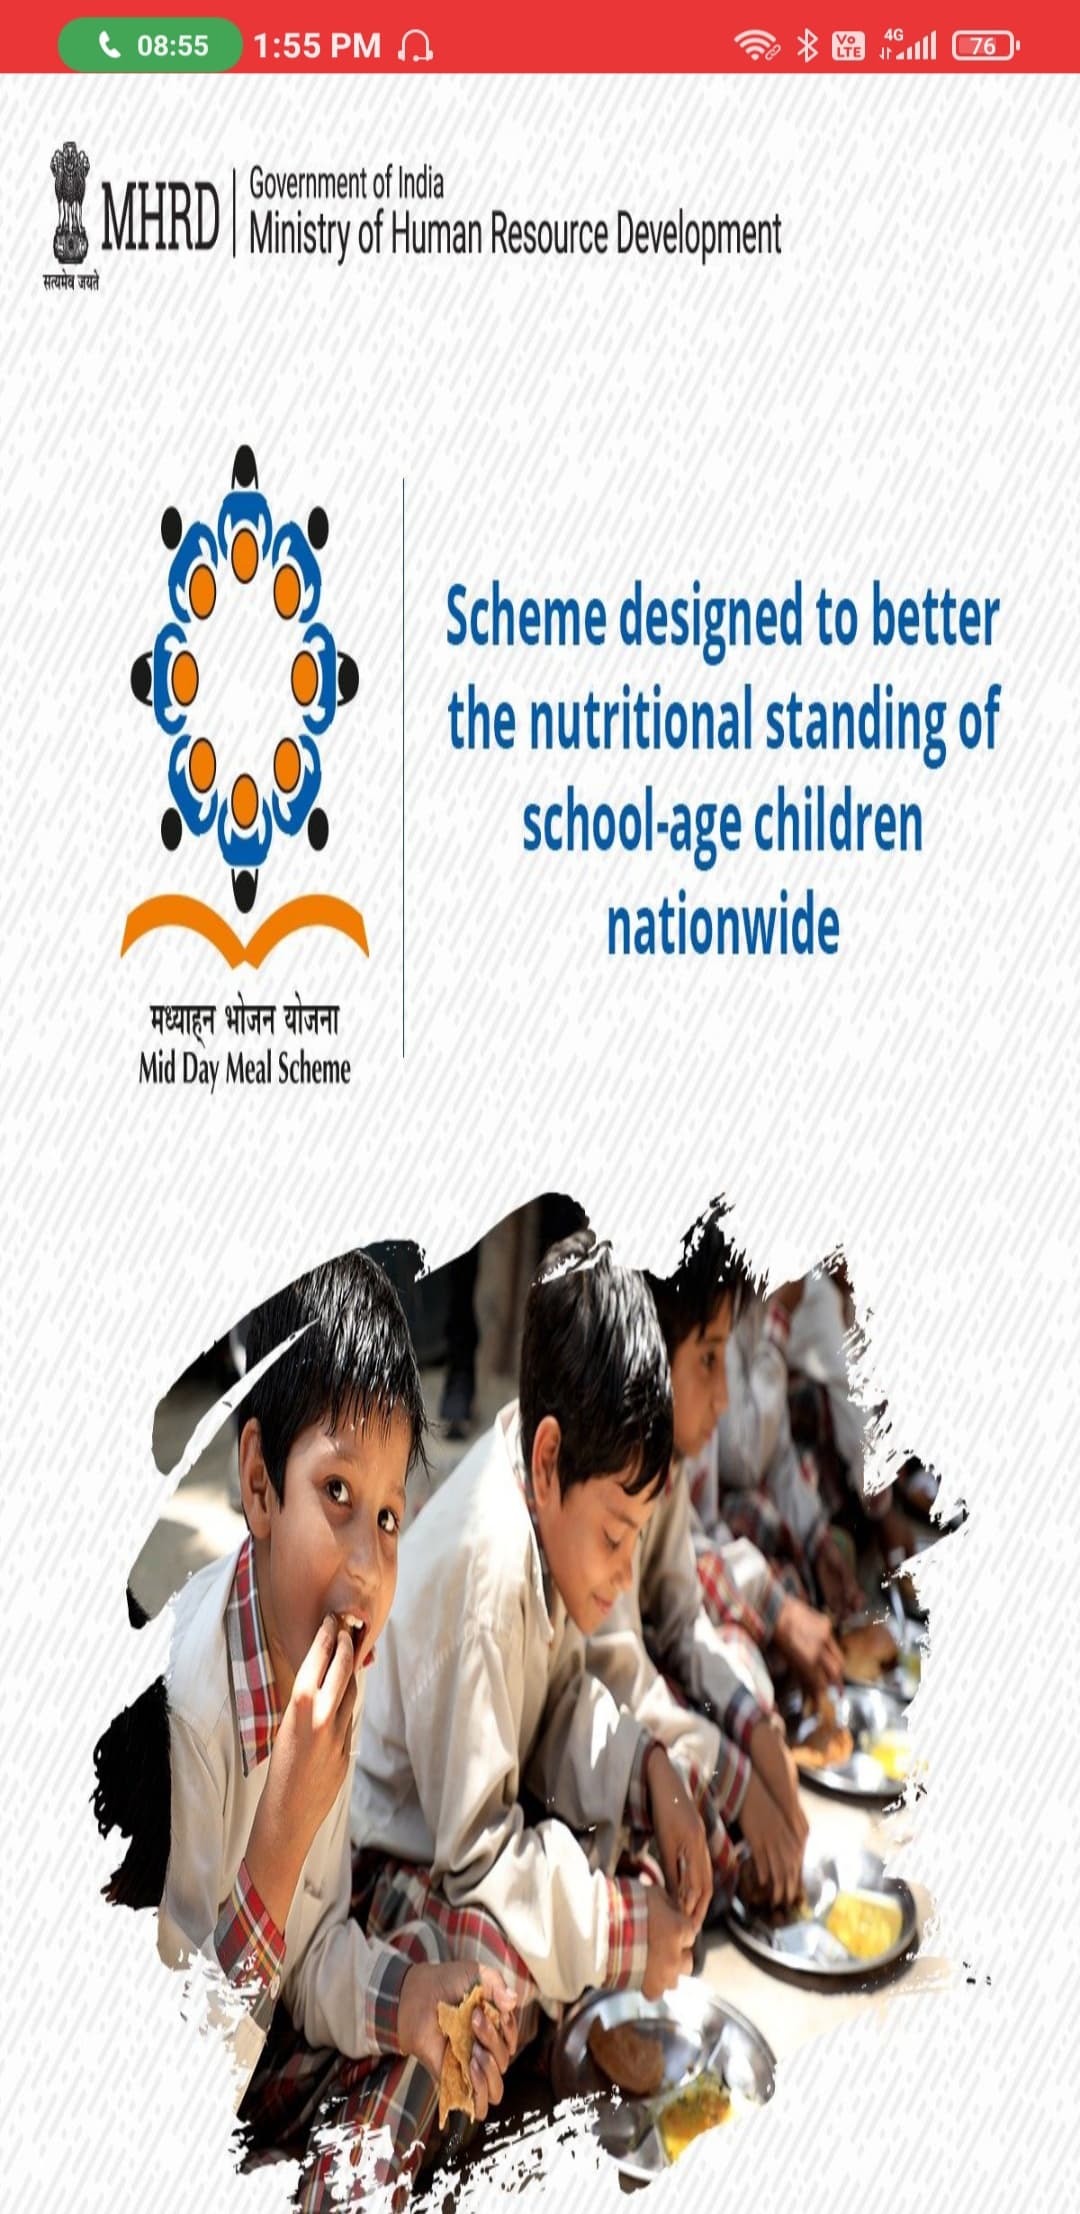 4G
08:55
1:55 PM A
Vo
LTE
alll 76
MHRD Ministry of Human Resource Development
सत्यमेव जयते
Scheme designed to better
the nutritional standing of
school-age children
nationwide
मध्याहन भोजन योजना
Mid Day Meal Scheme
